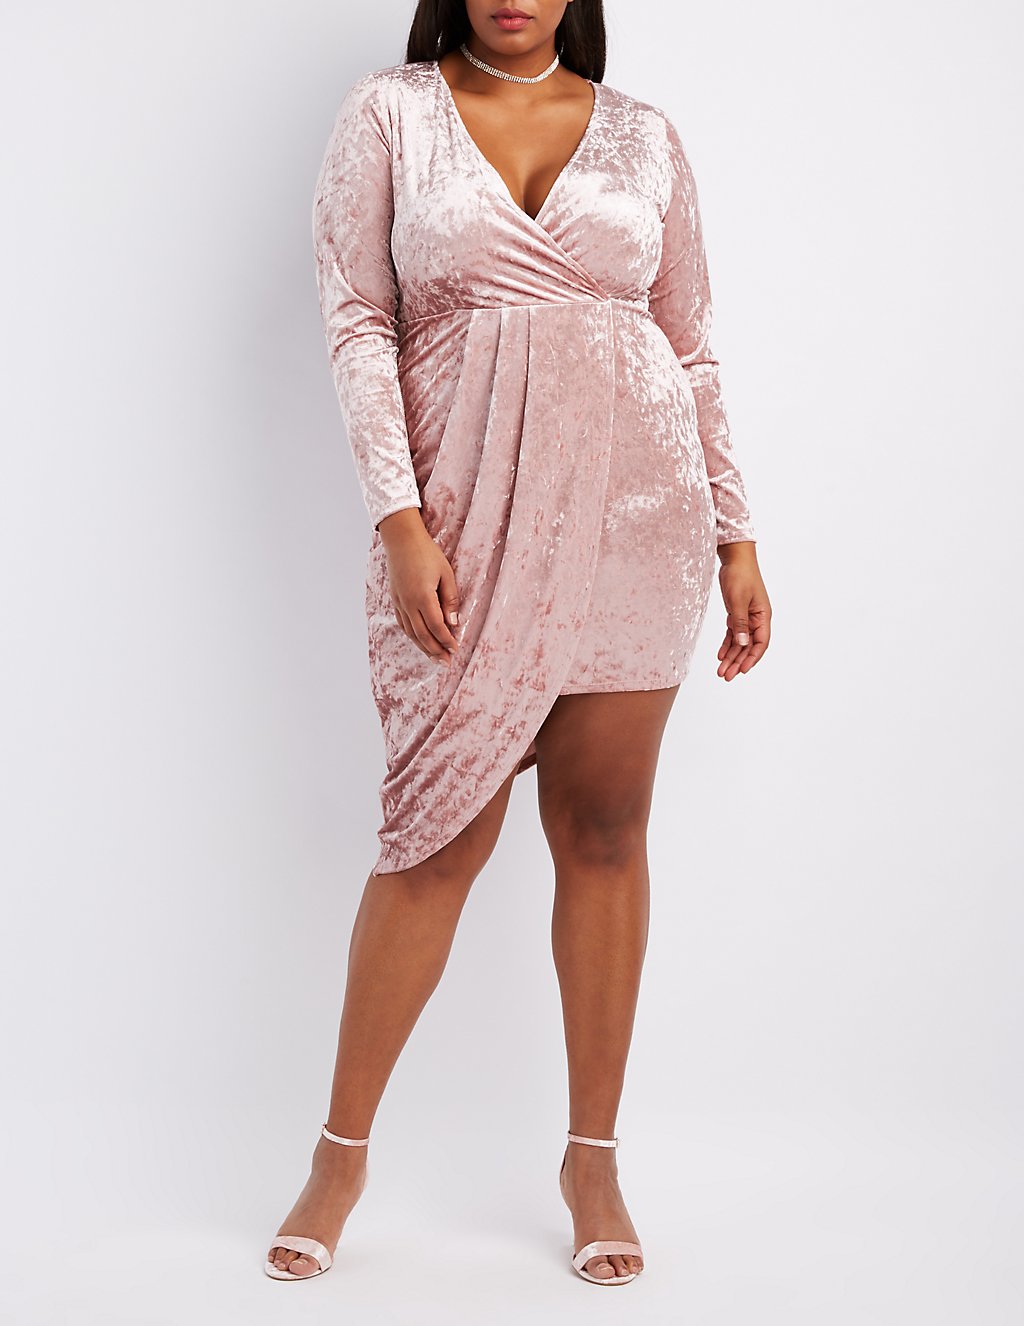 Charlotte Russe New Years Eve Plus Size Dresses